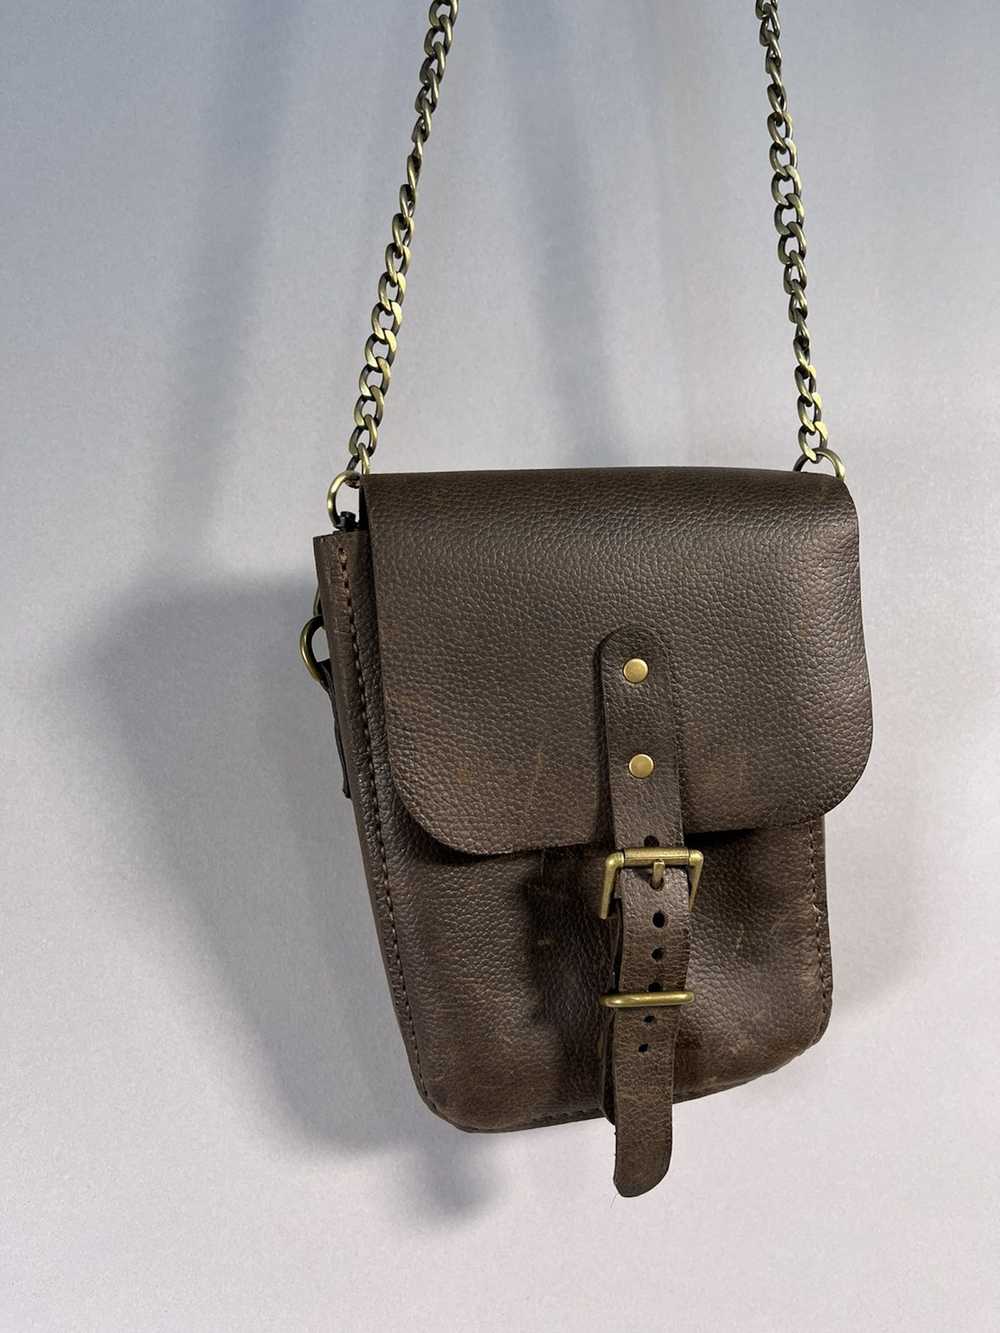 Leather × Vintage Vintage Leather Bag with Chain - image 2